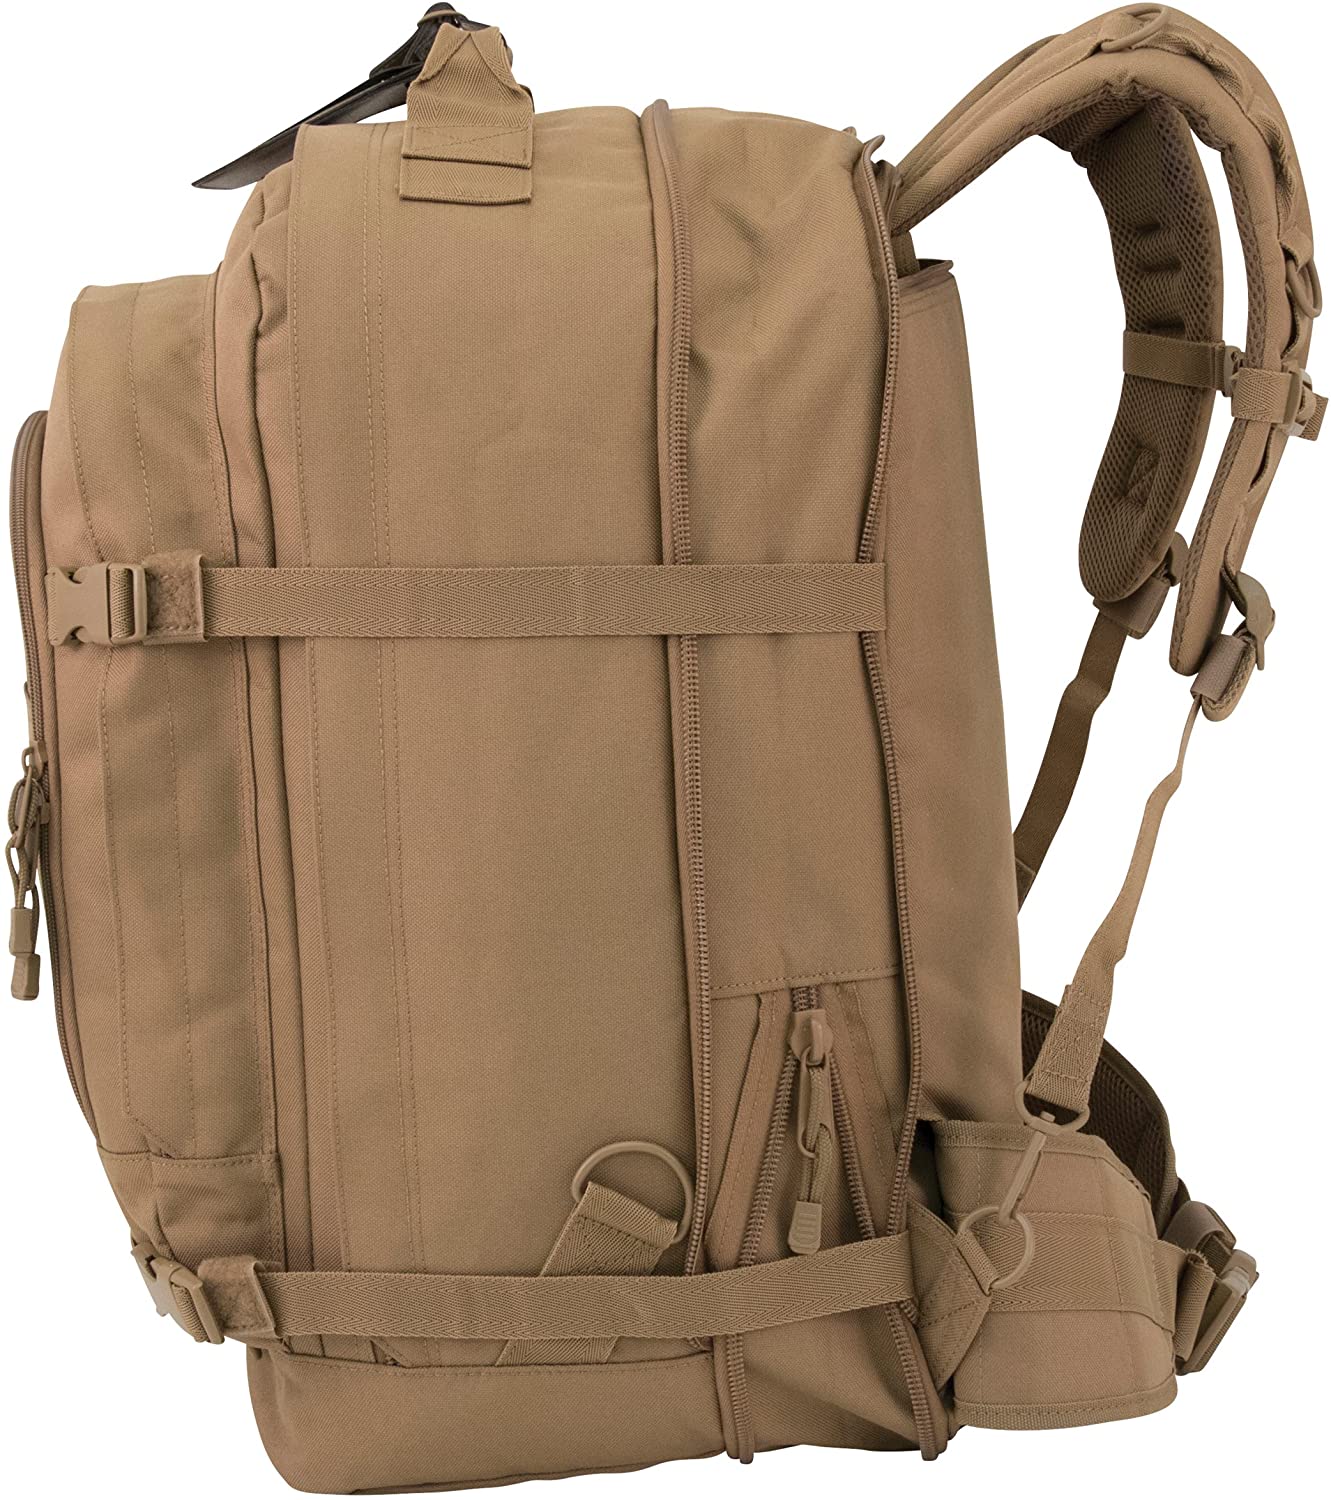 Lzdrason rucksack tactical Supply for outdoor use-1